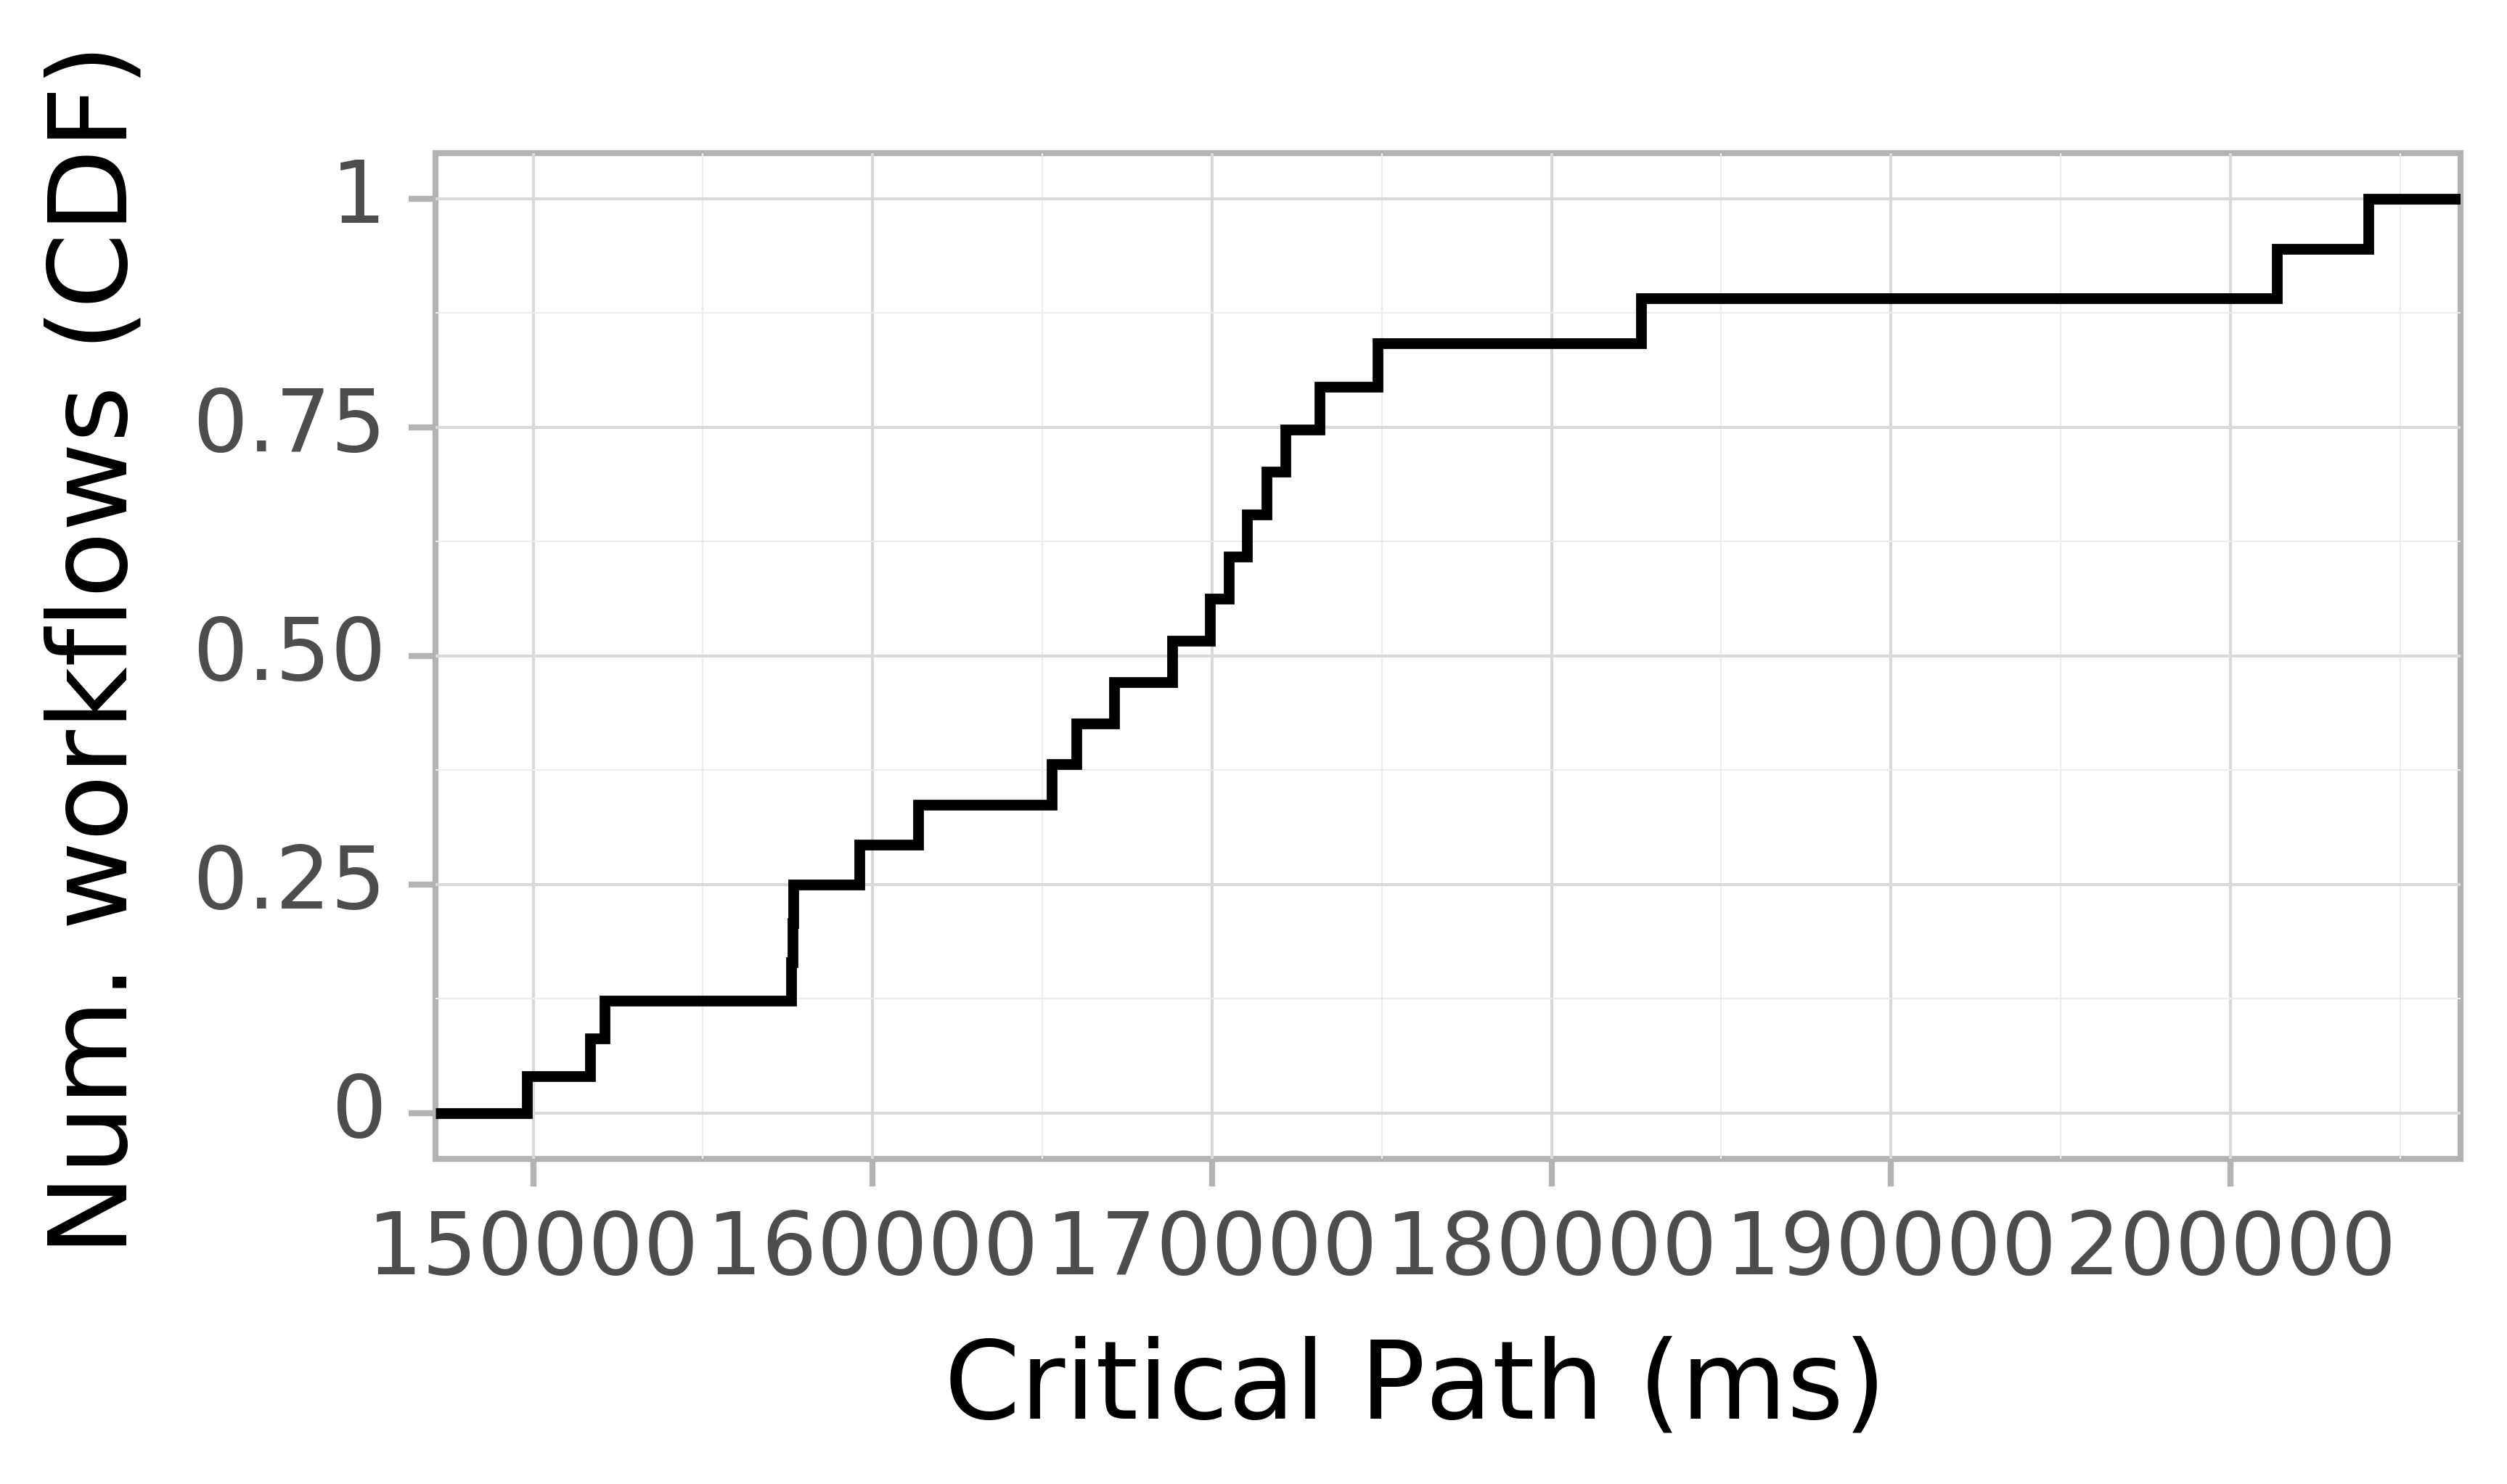 Job runtime CDF graph for the askalon-new_ee65 trace.